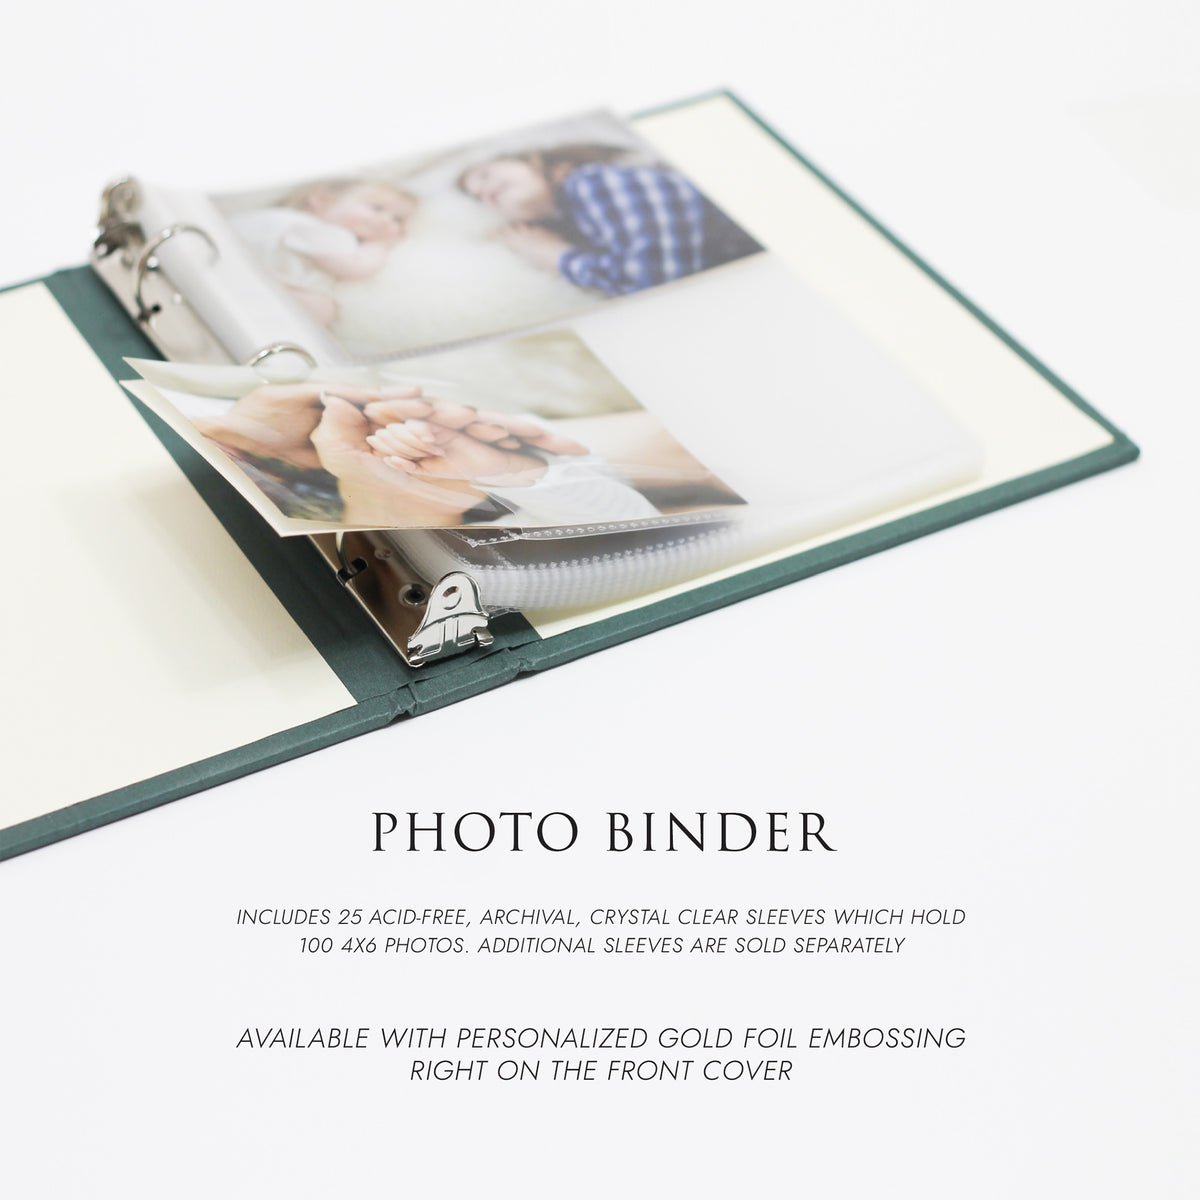 Medium Photo Binder For 4x6 Photos | Cover: Amethyst Silk | Available Personalized